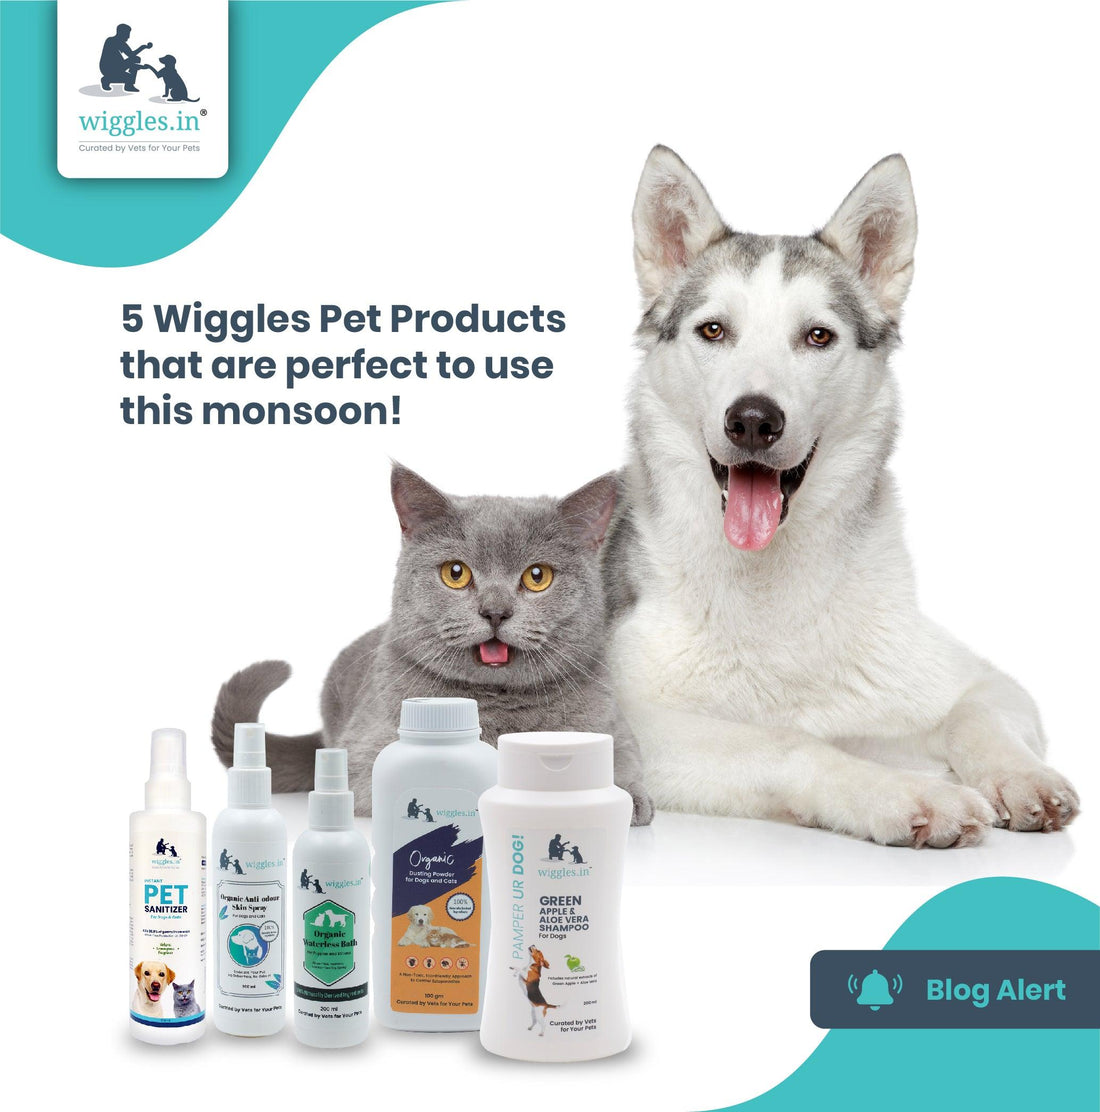 5 Wiggles Pet Products that are perfect to use this monsoon!